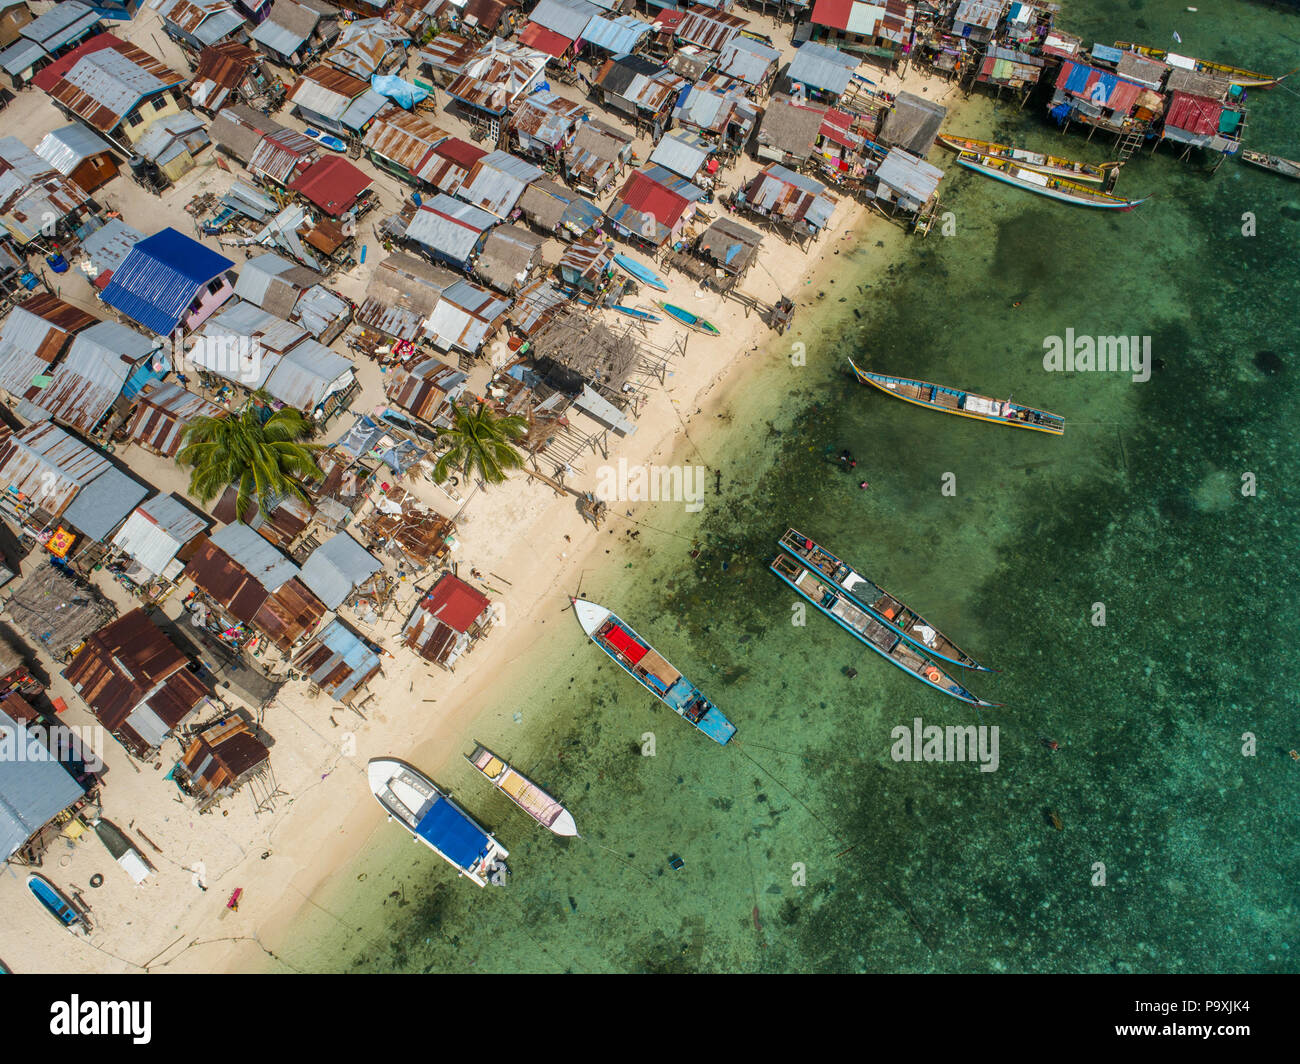 A drone photo looking down on a very poor Bajau sea gypsy village, and beach, boats, and shallow tropical water, at Mabul Island, Sabah, Malaysia. Stock Photo